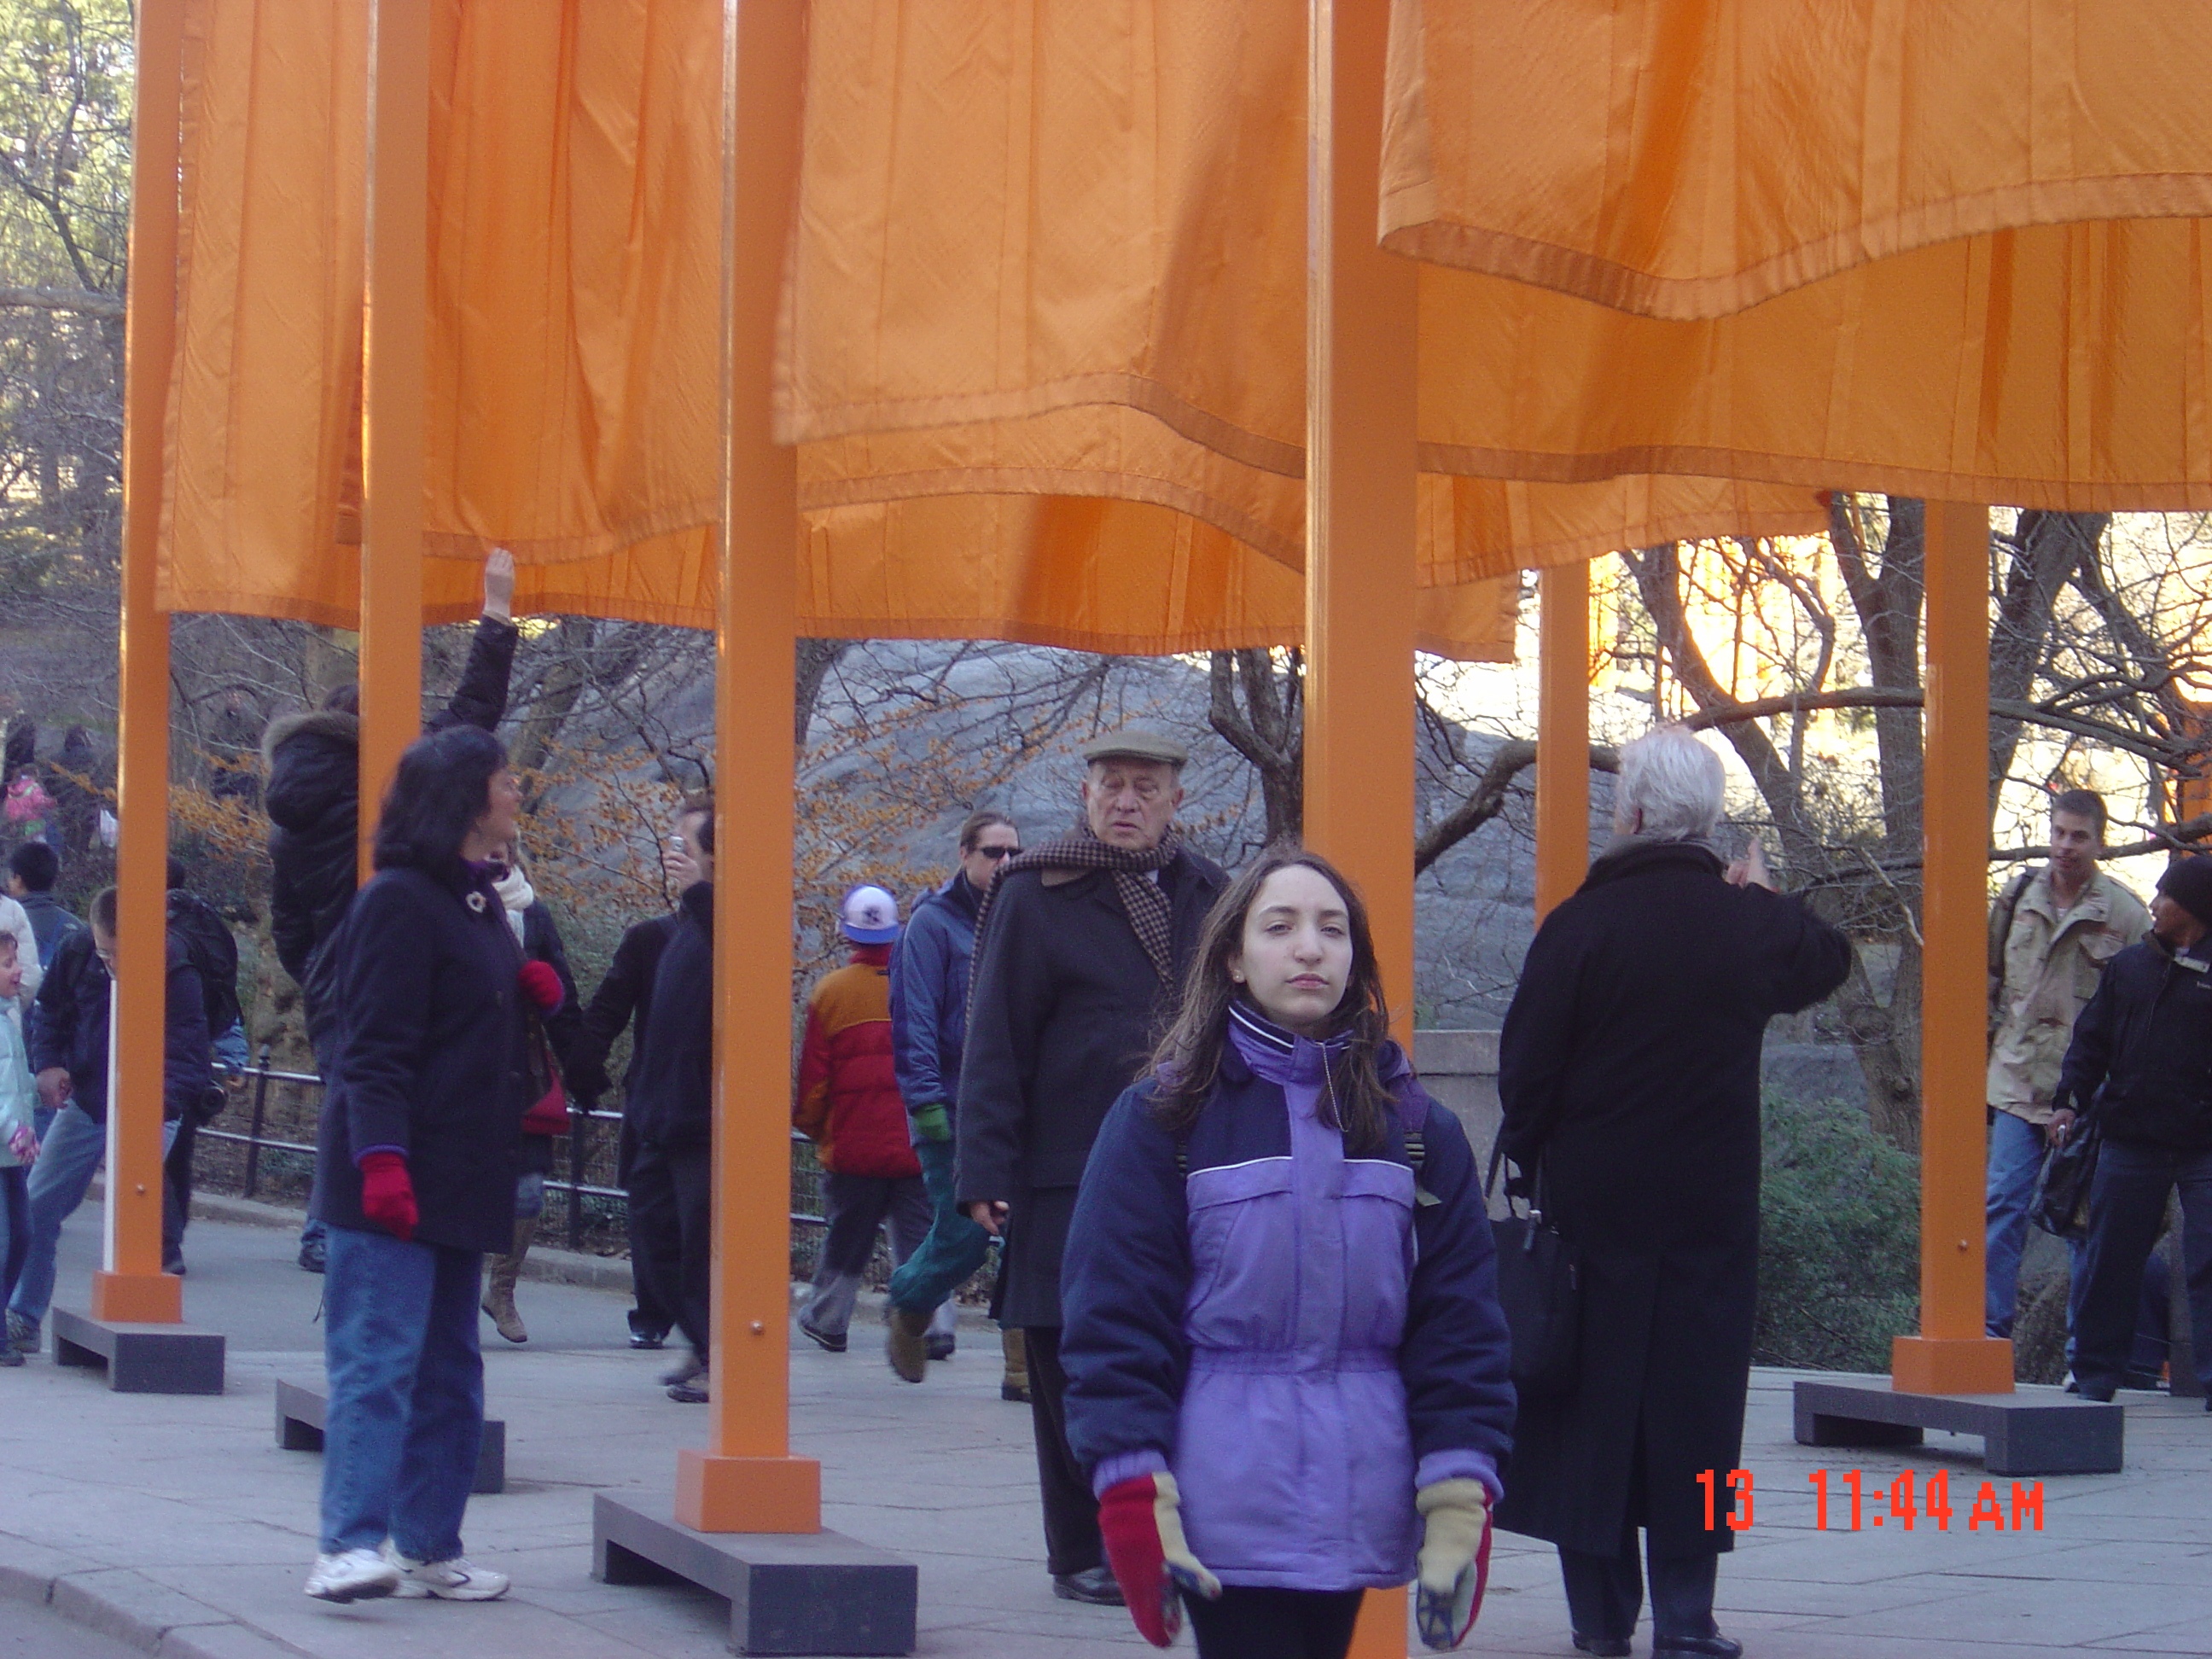 "The Gates" in Central Park, 2/13/05 